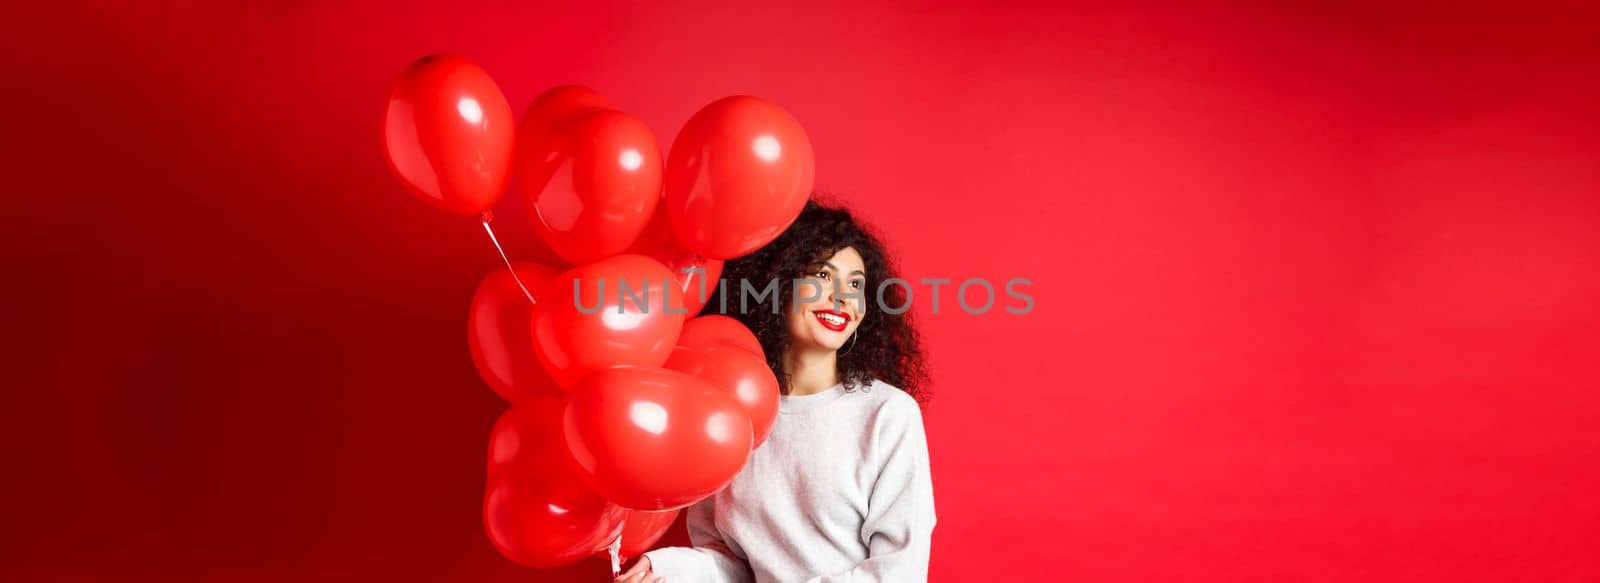 Holidays and celebration. Happy woman posing with party balloons on red background, looking aside at empty space.